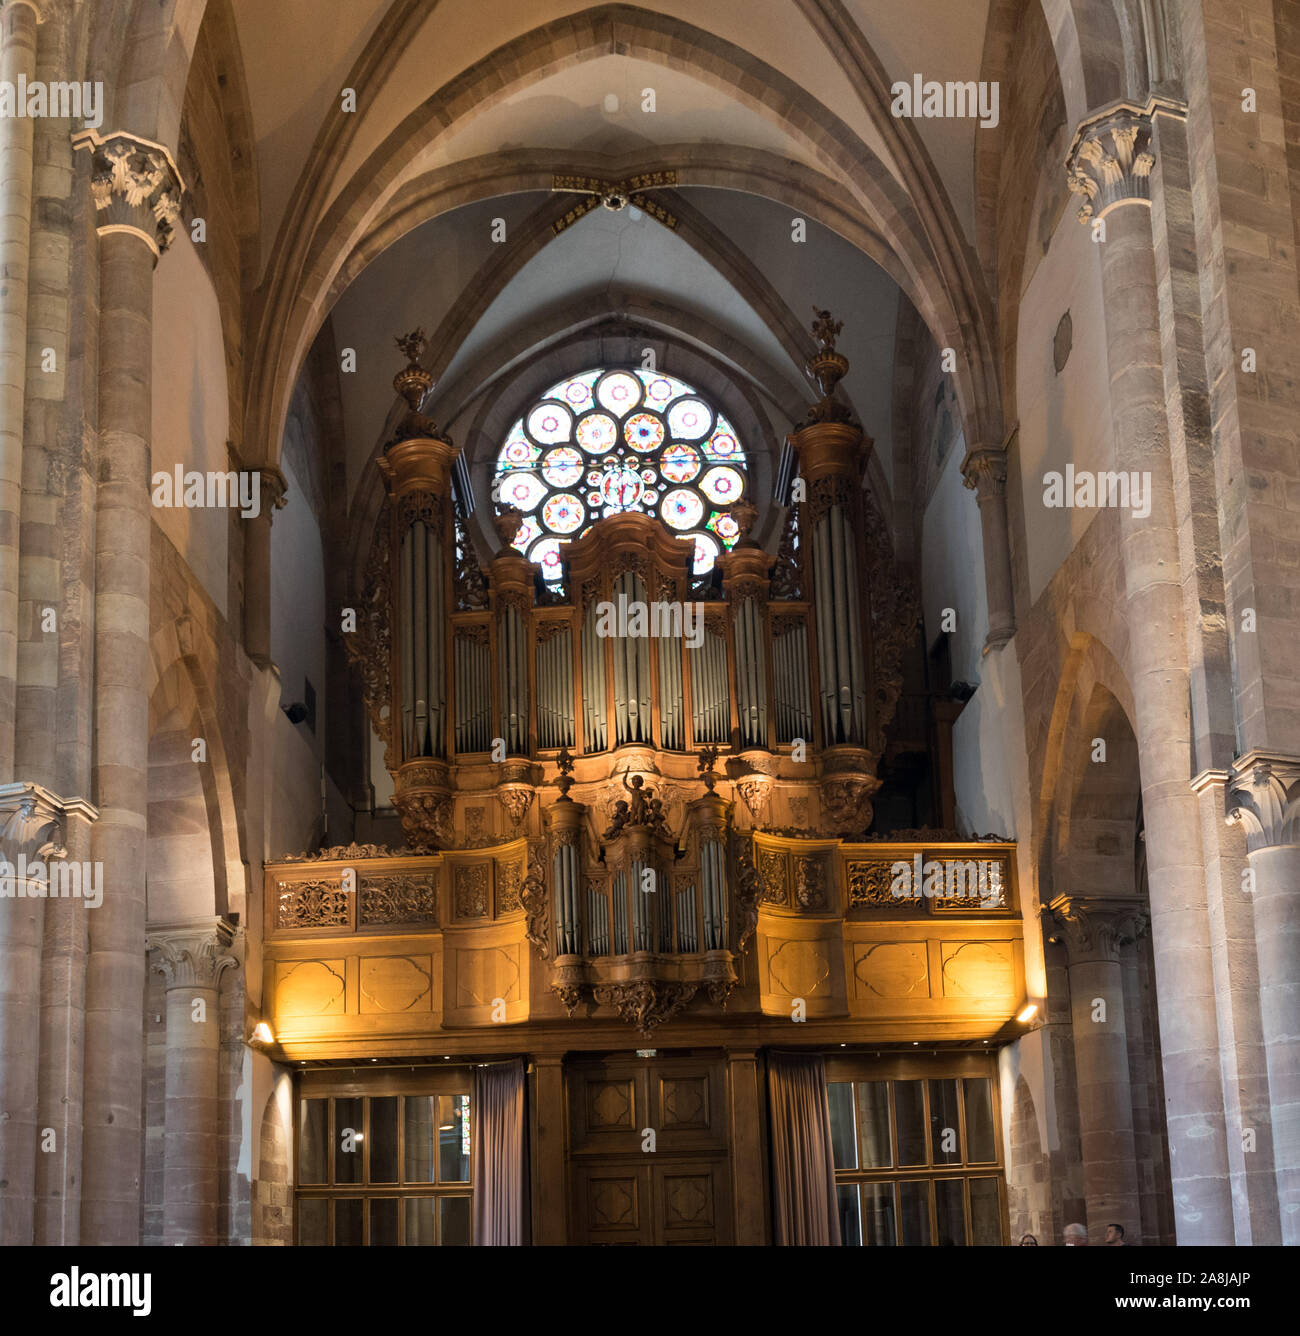 Strasbourg, Bas-Rhin / France - 10 August 2019: interior view of the Saint Thomas' Church in Strasbourg with the organ Stock Photo